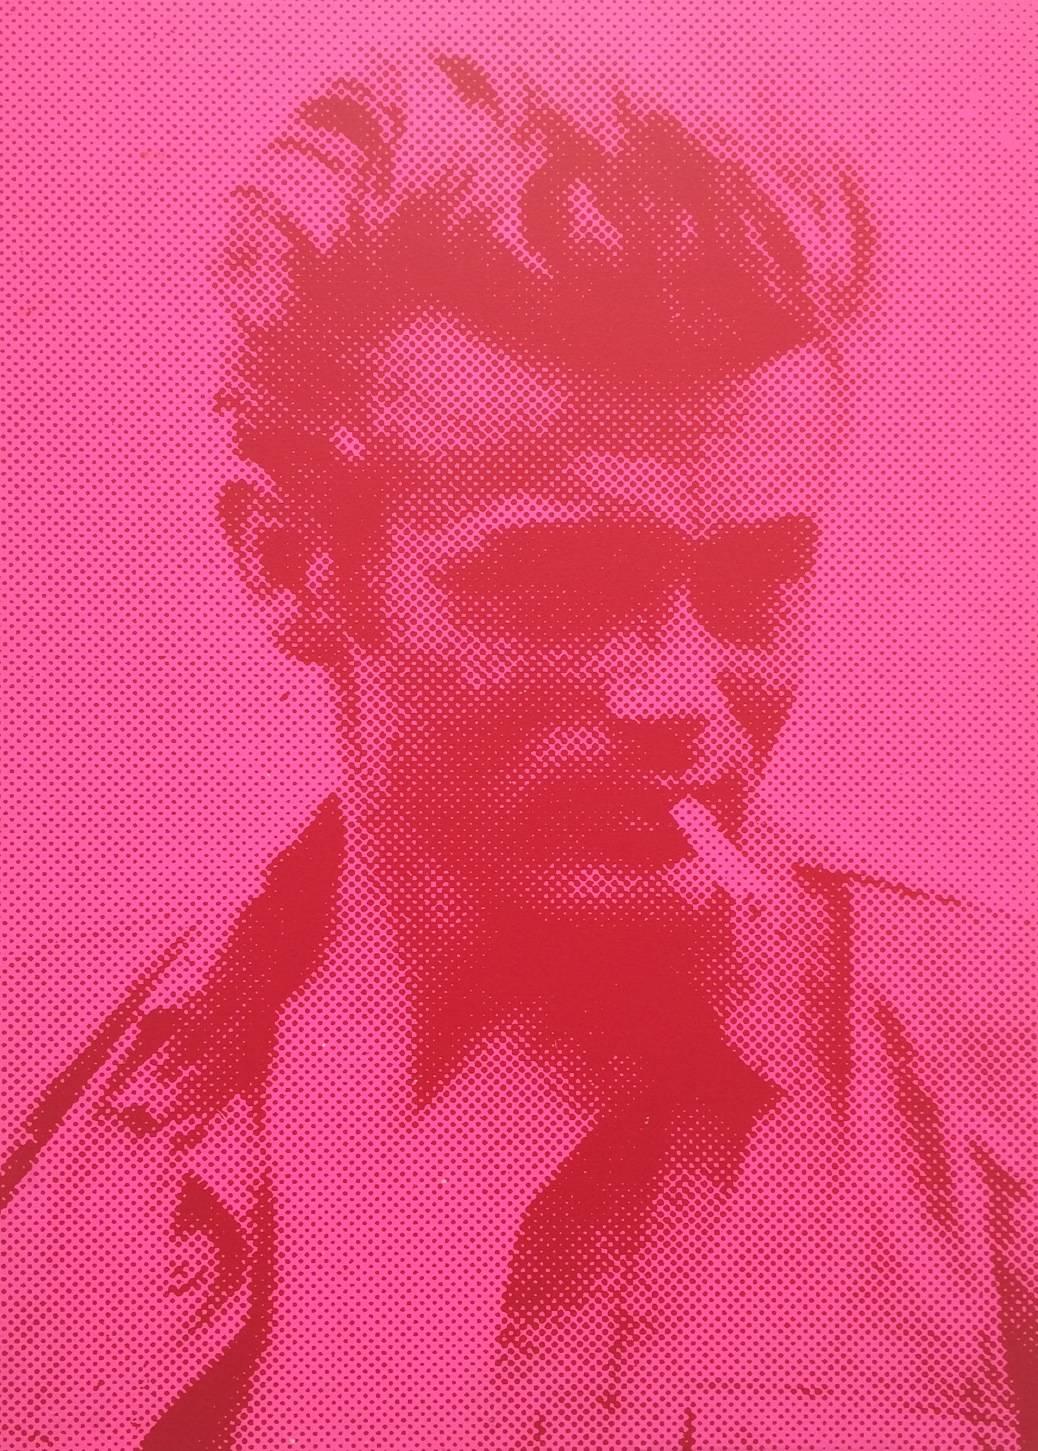 Russell Young, "James Dean (Pink and Red)", original silkscreen on canvas